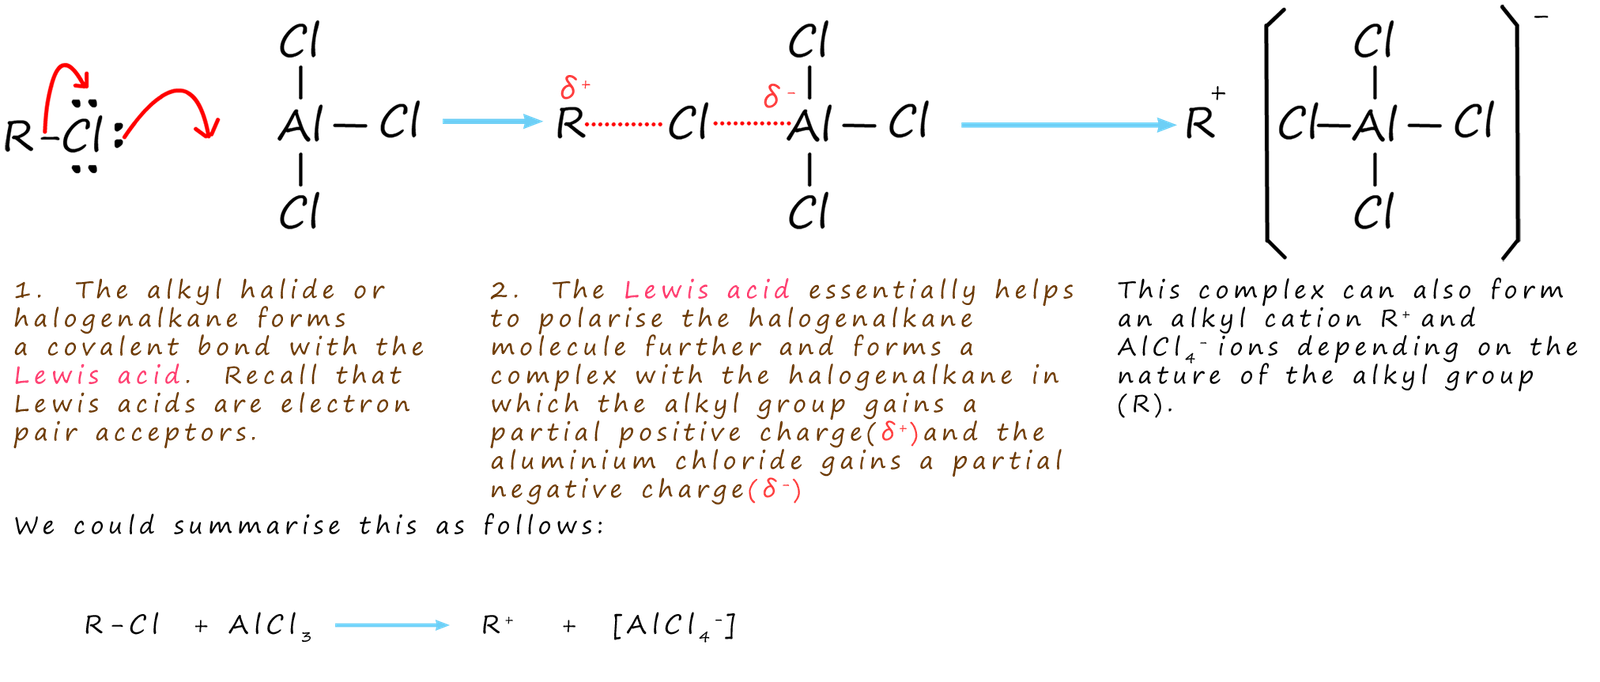 Reaction of the Lewis acid with the halogenalkane